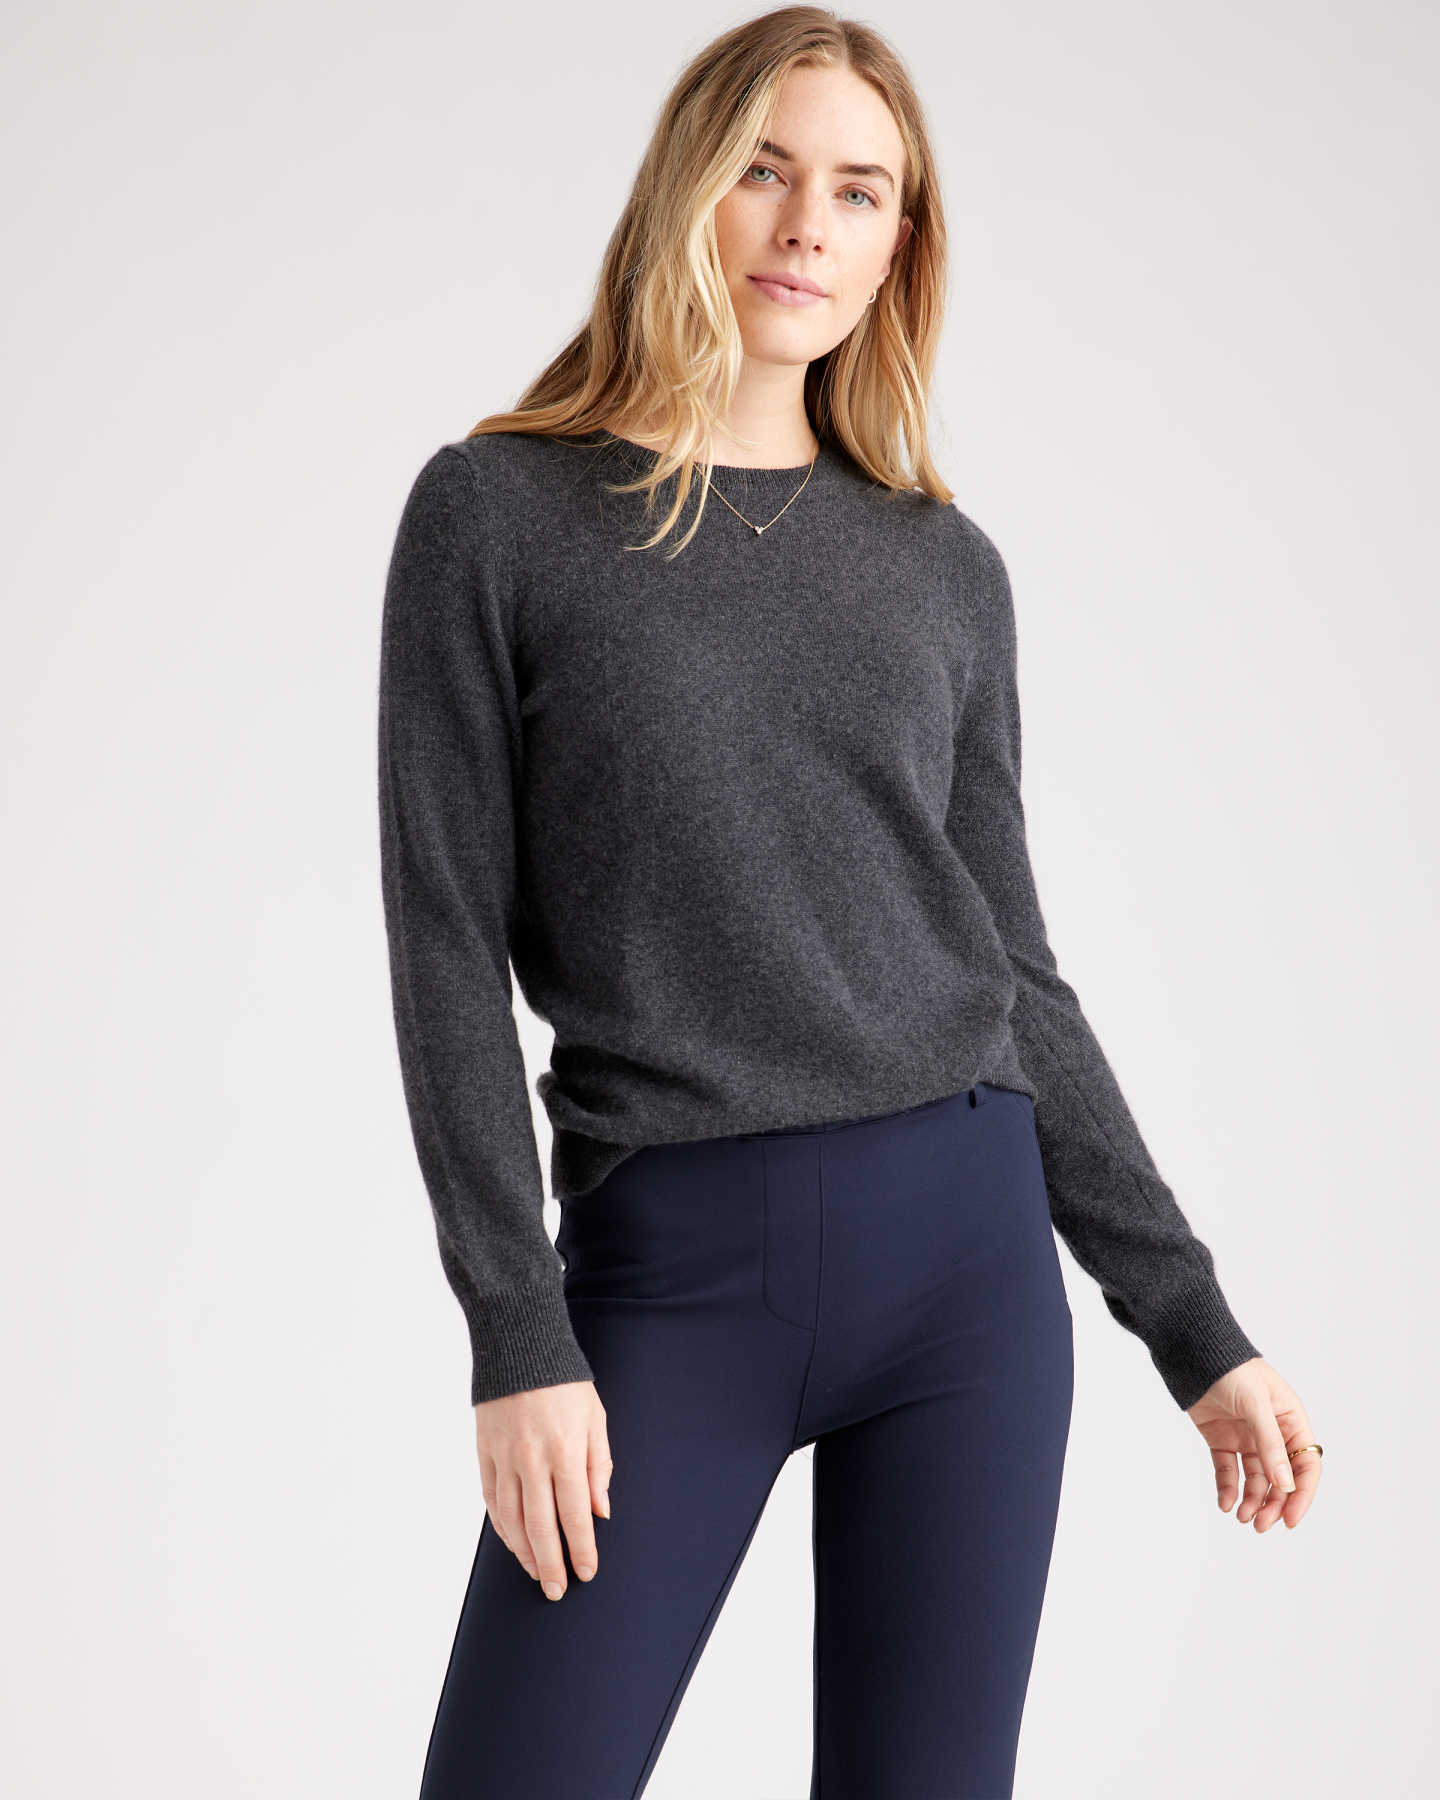 Luxe Baby Cashmere Crewneck Sweater - Charcoal